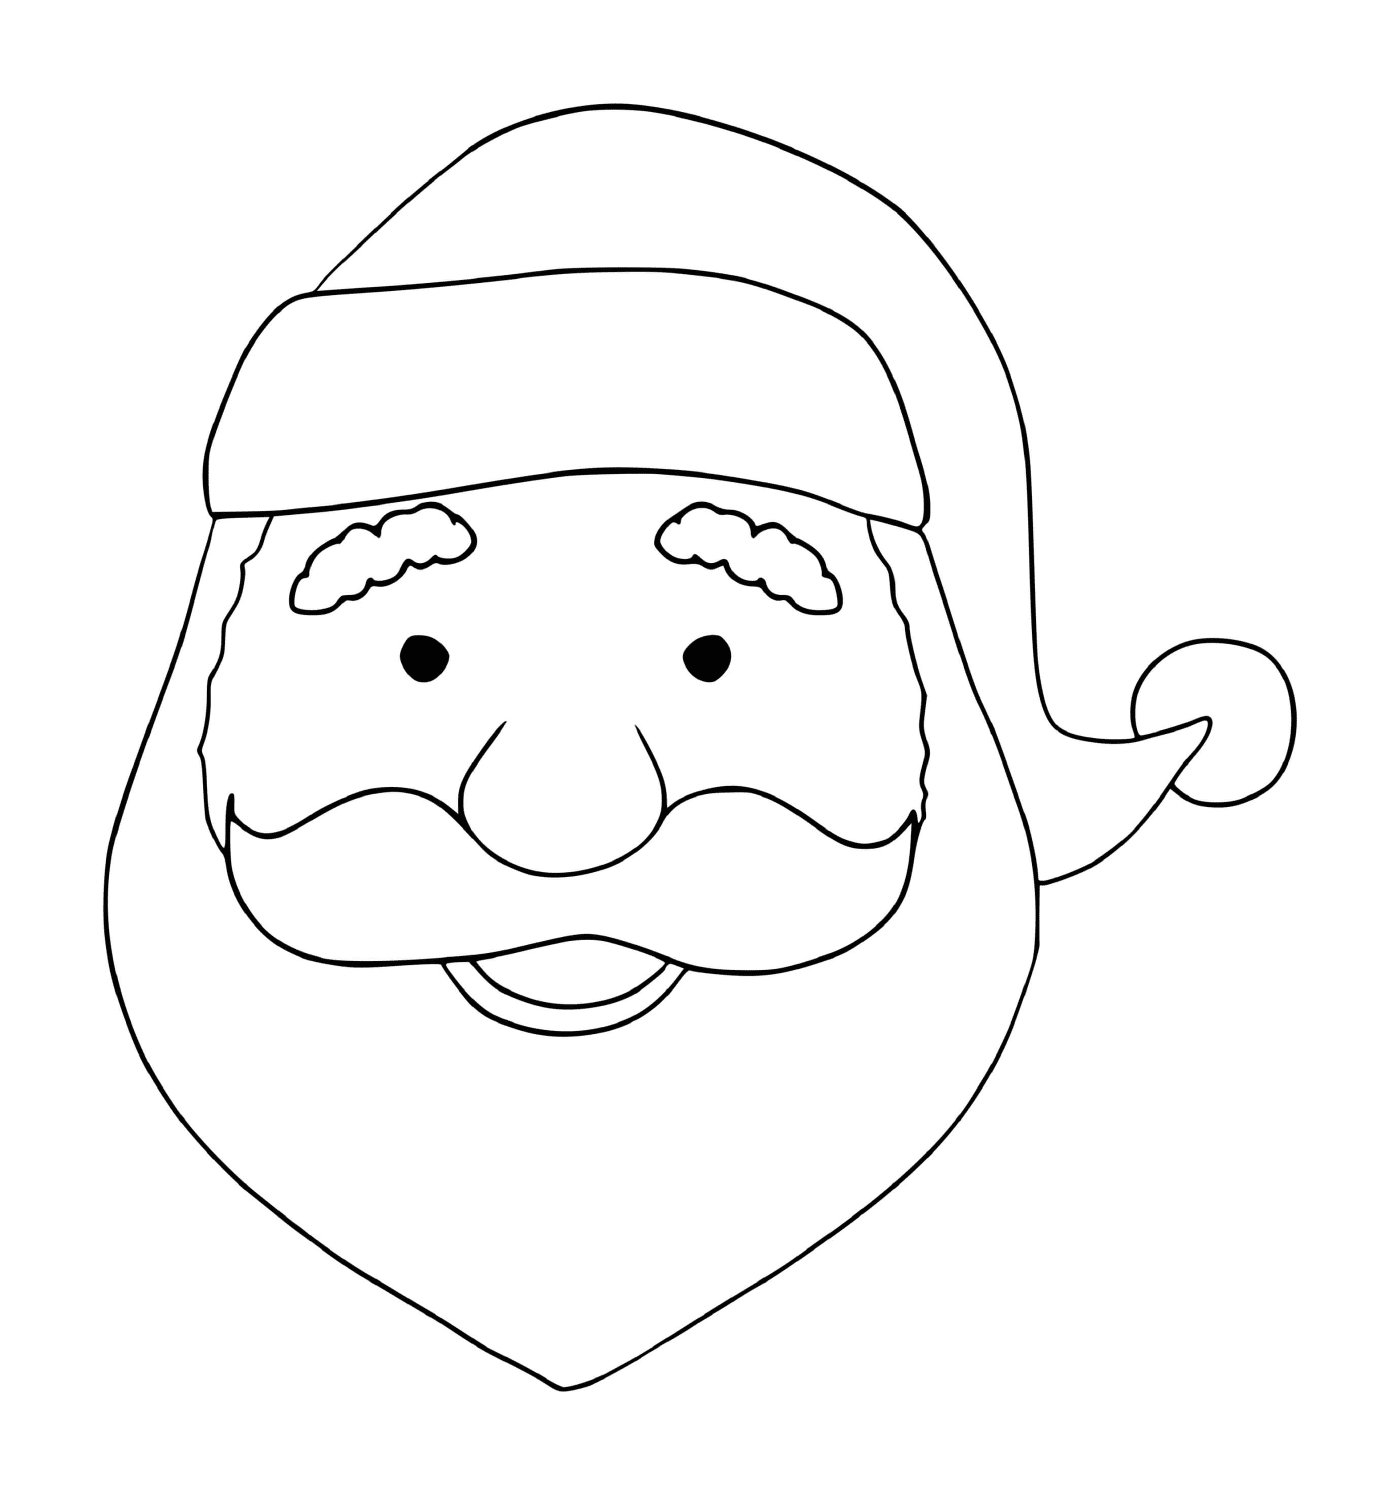  Easy Santa Claus for toddlers 